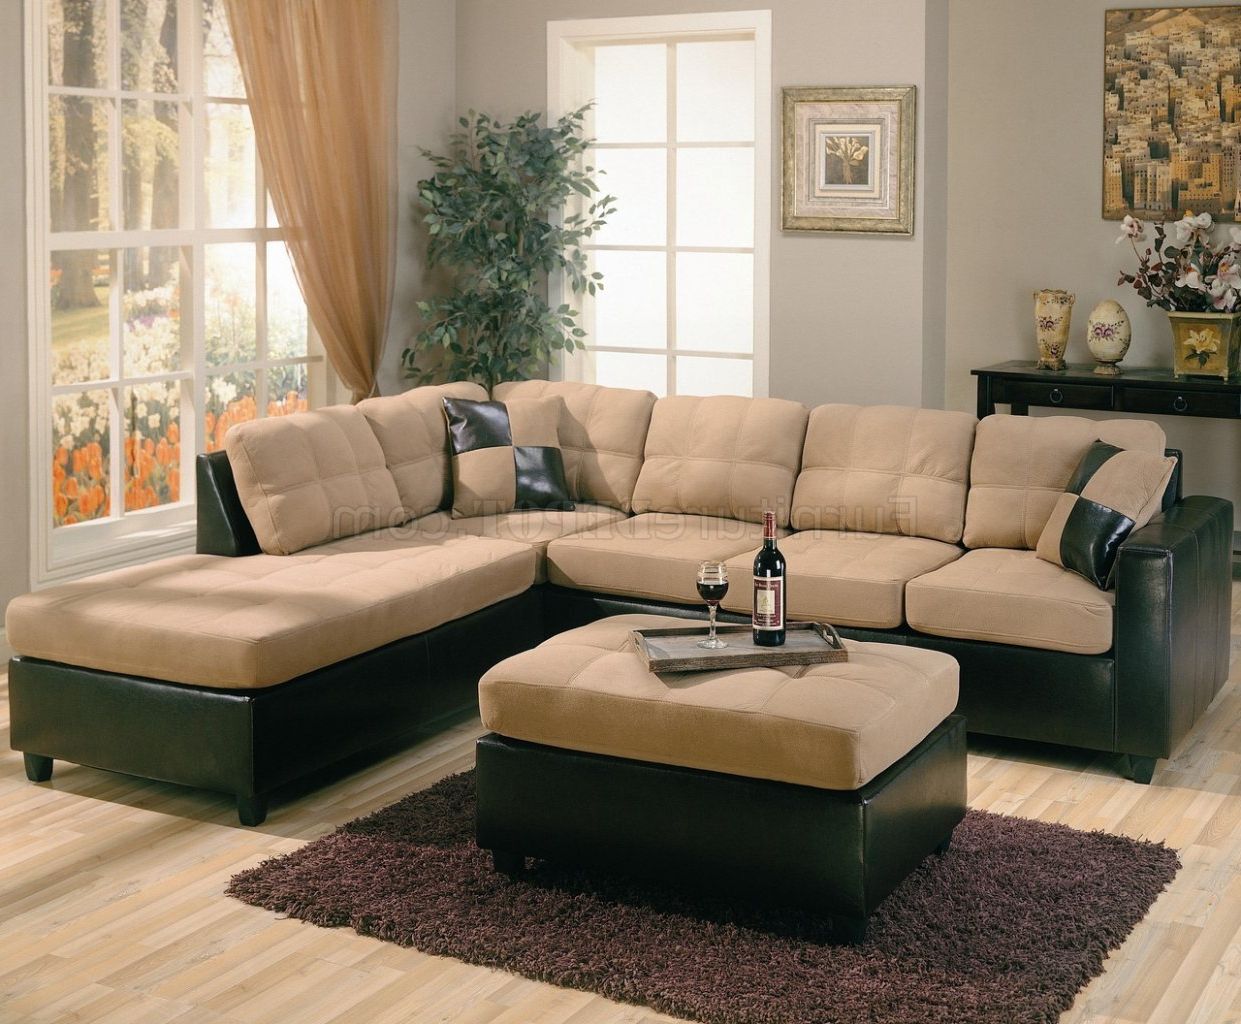 Most Recently Released 2 Tone Chocolate Microfiber Sofas Throughout Two Tone Tan Microfiber & Dark Brown Faux Leather Sectional Sofa (View 9 of 15)